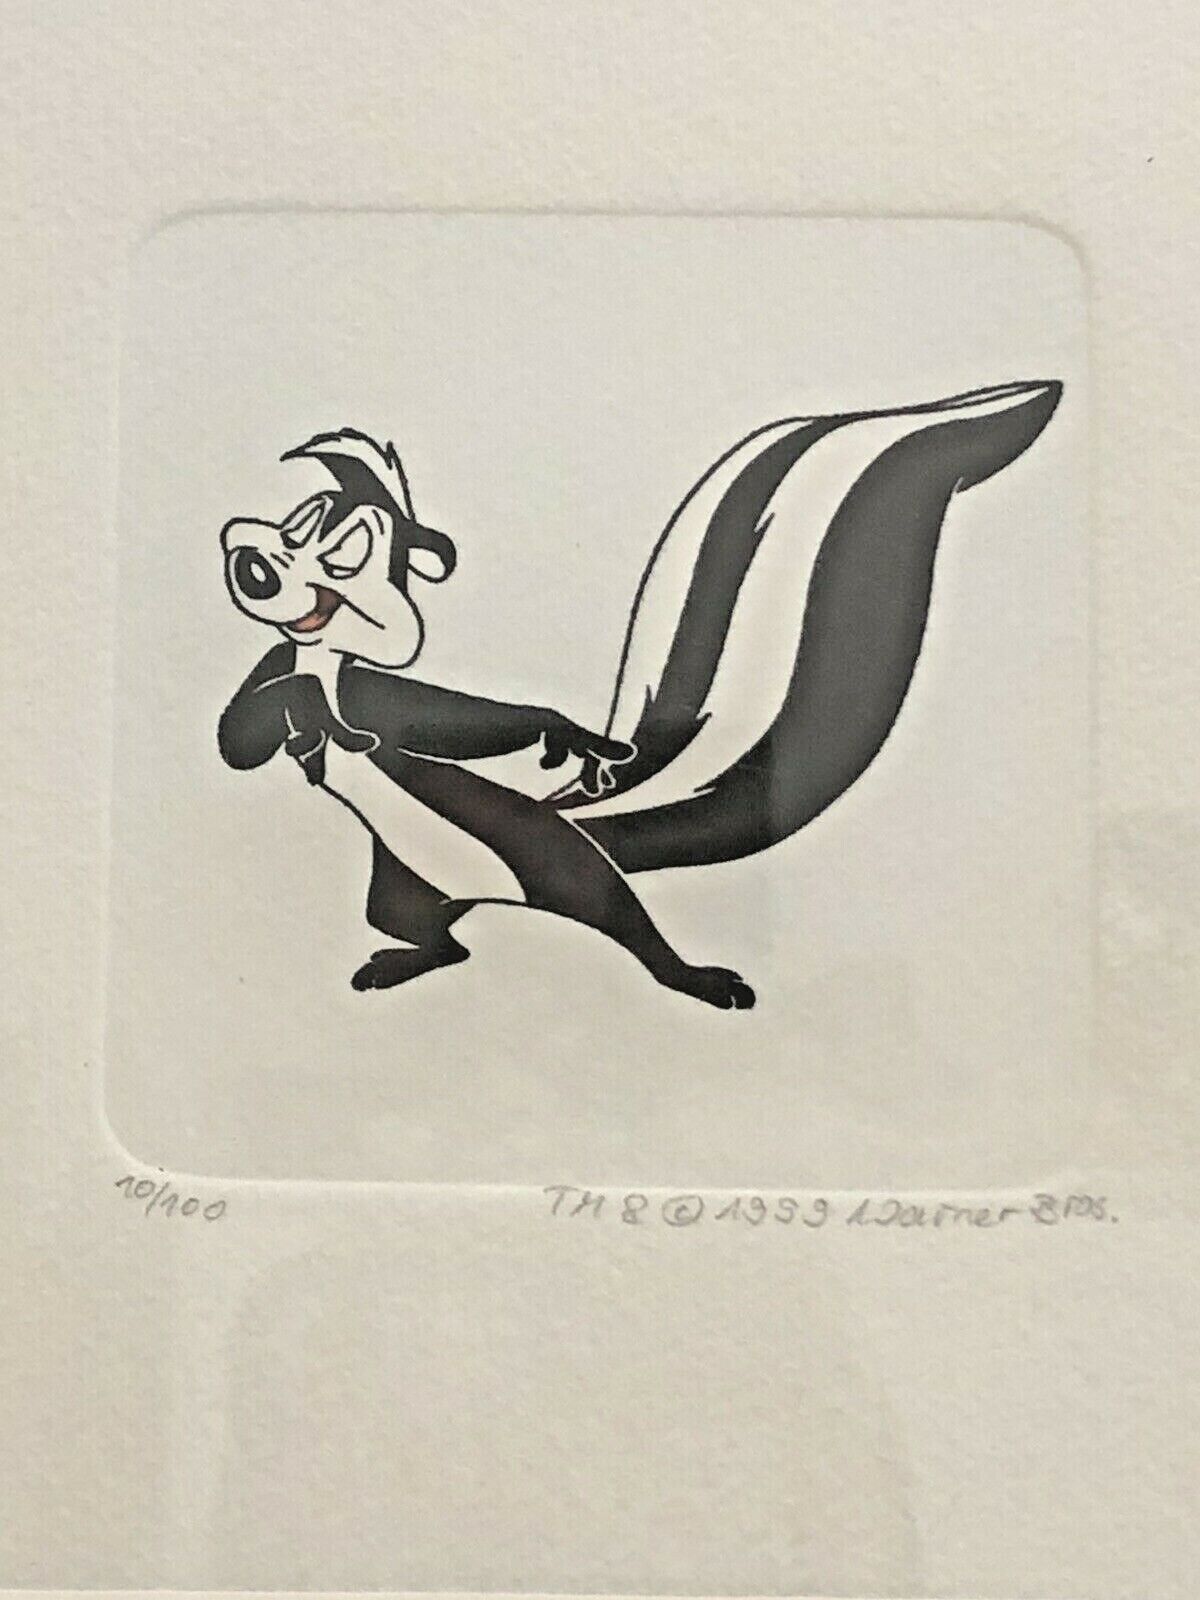 RARE CHUCK JONES PEPE LE PEW ETCHING WARNER BROS LIMITED EDITION 10/100 FRAMED